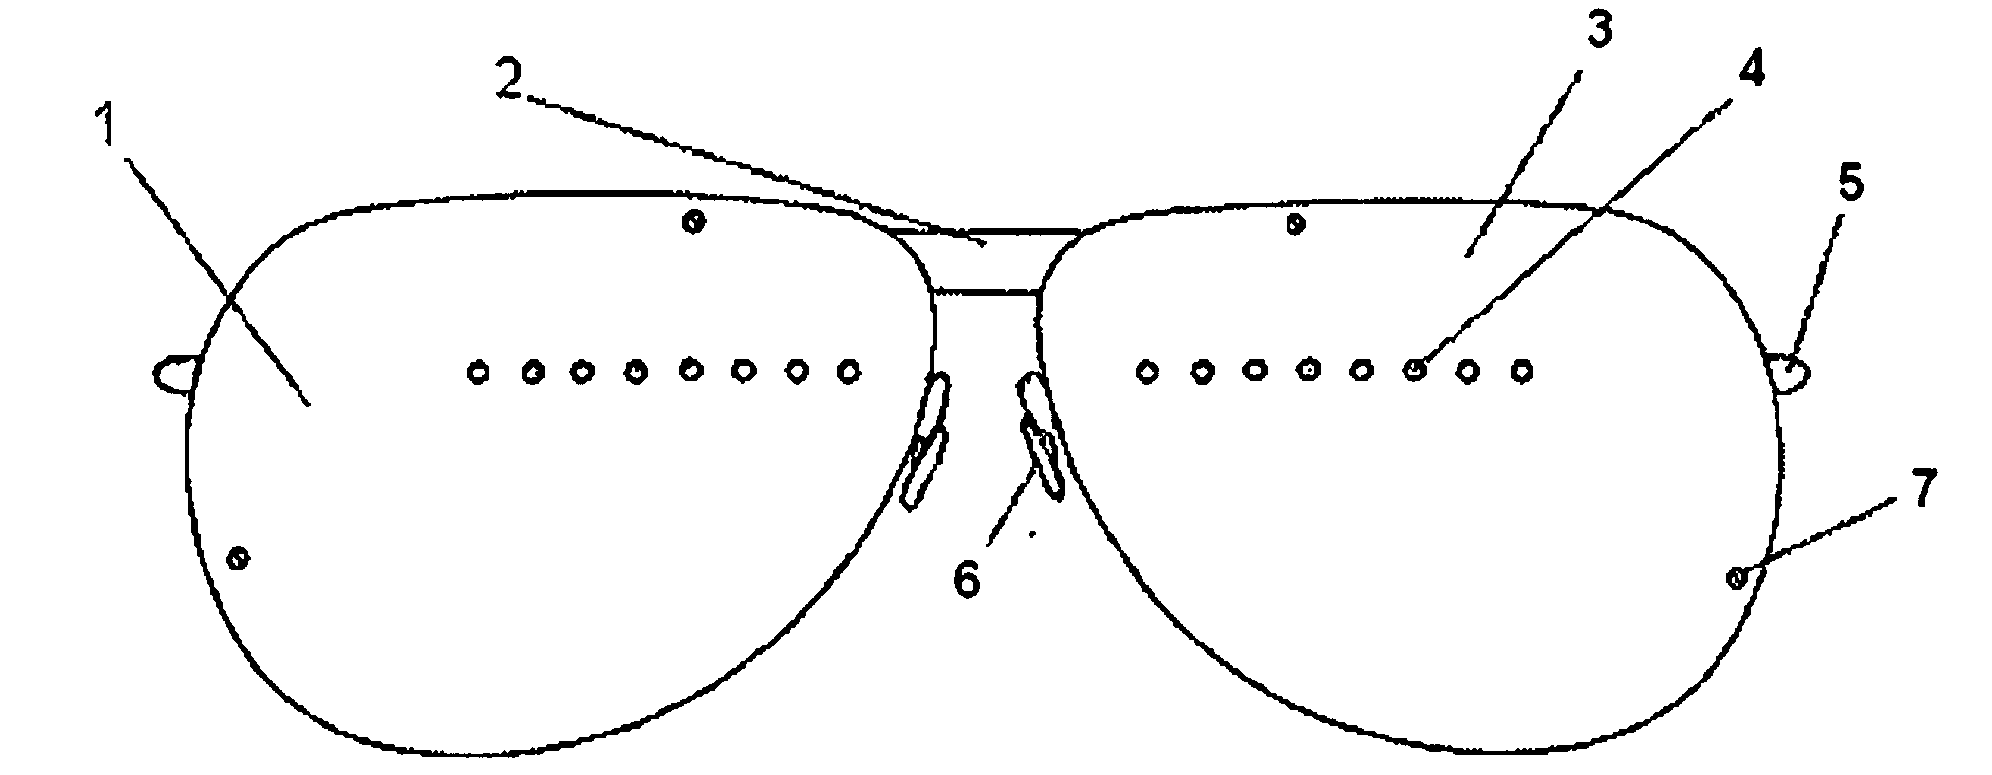 Apparatus for viewing two-dimensional images in 3-D